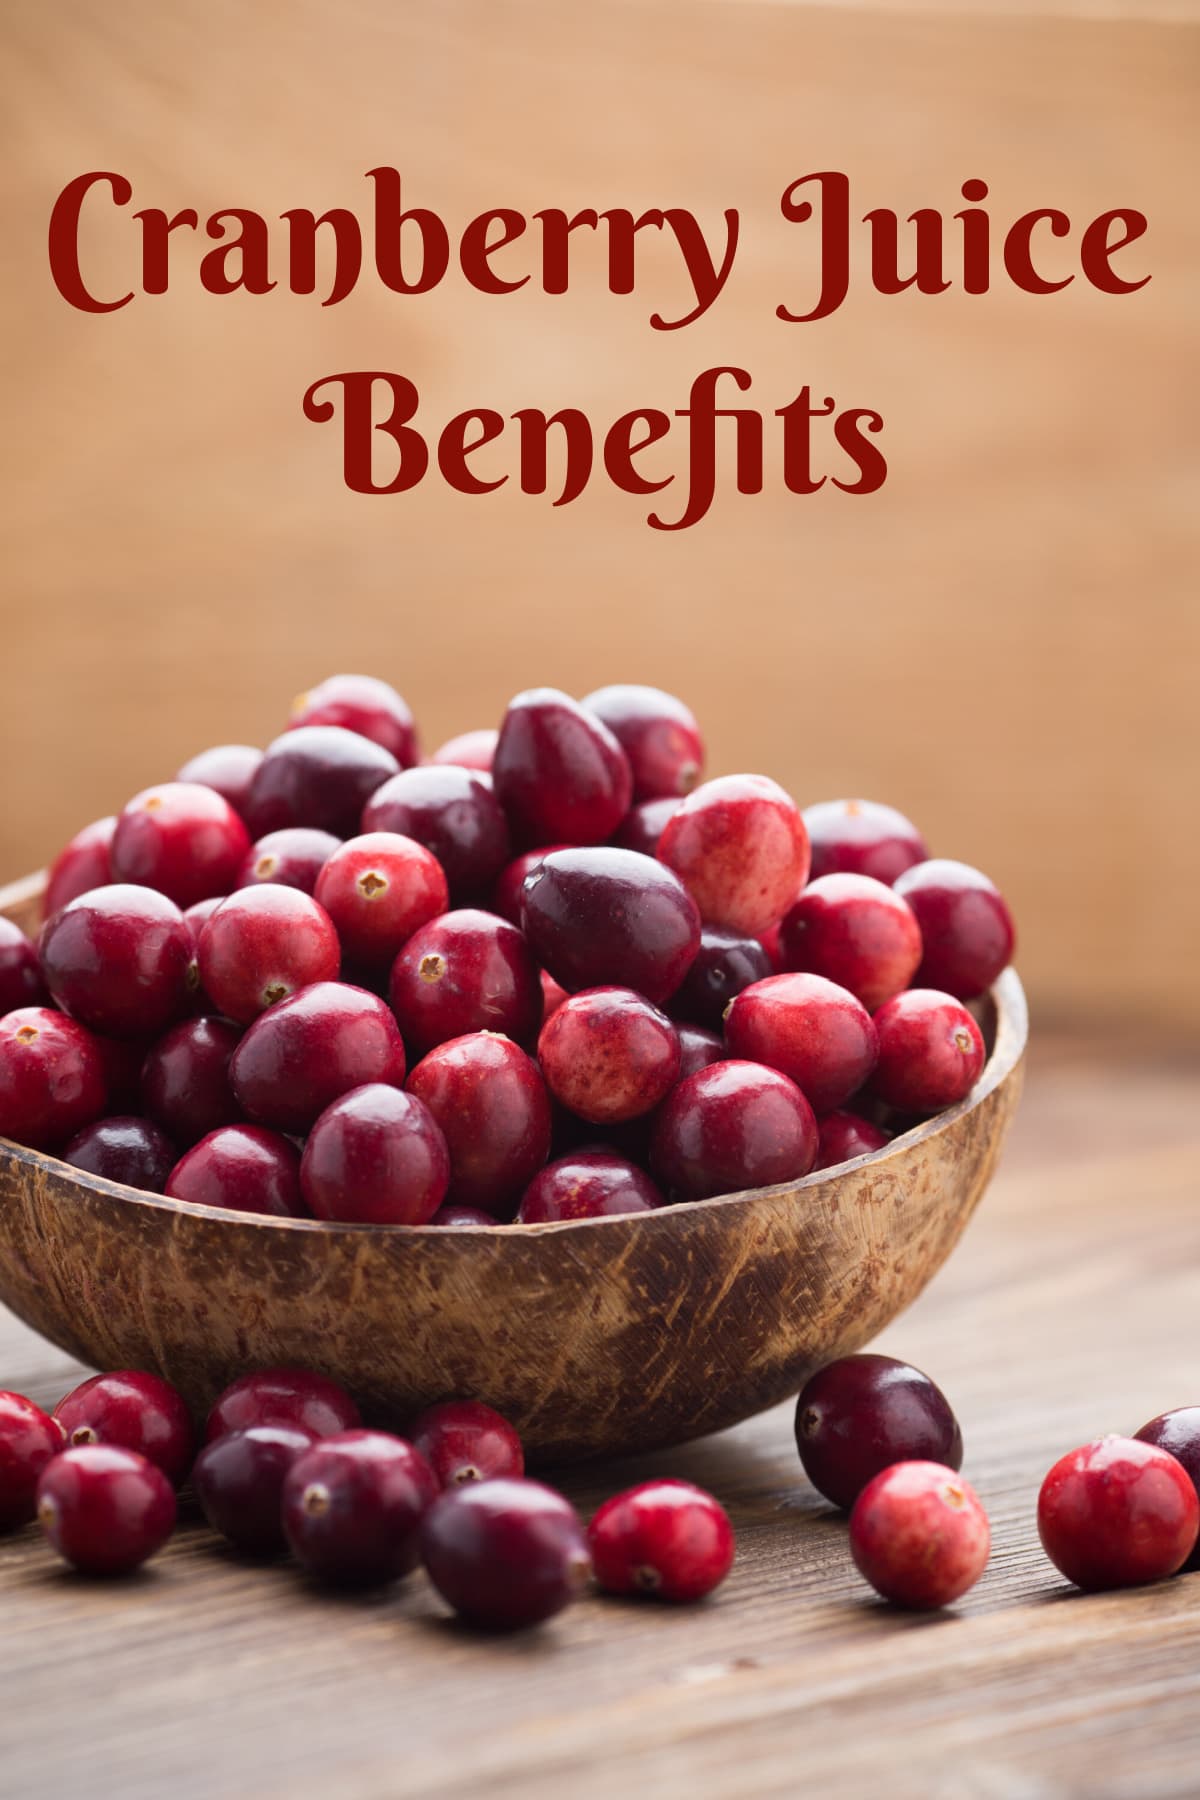 Is Ocean Spray Cranberry Juice Good For You